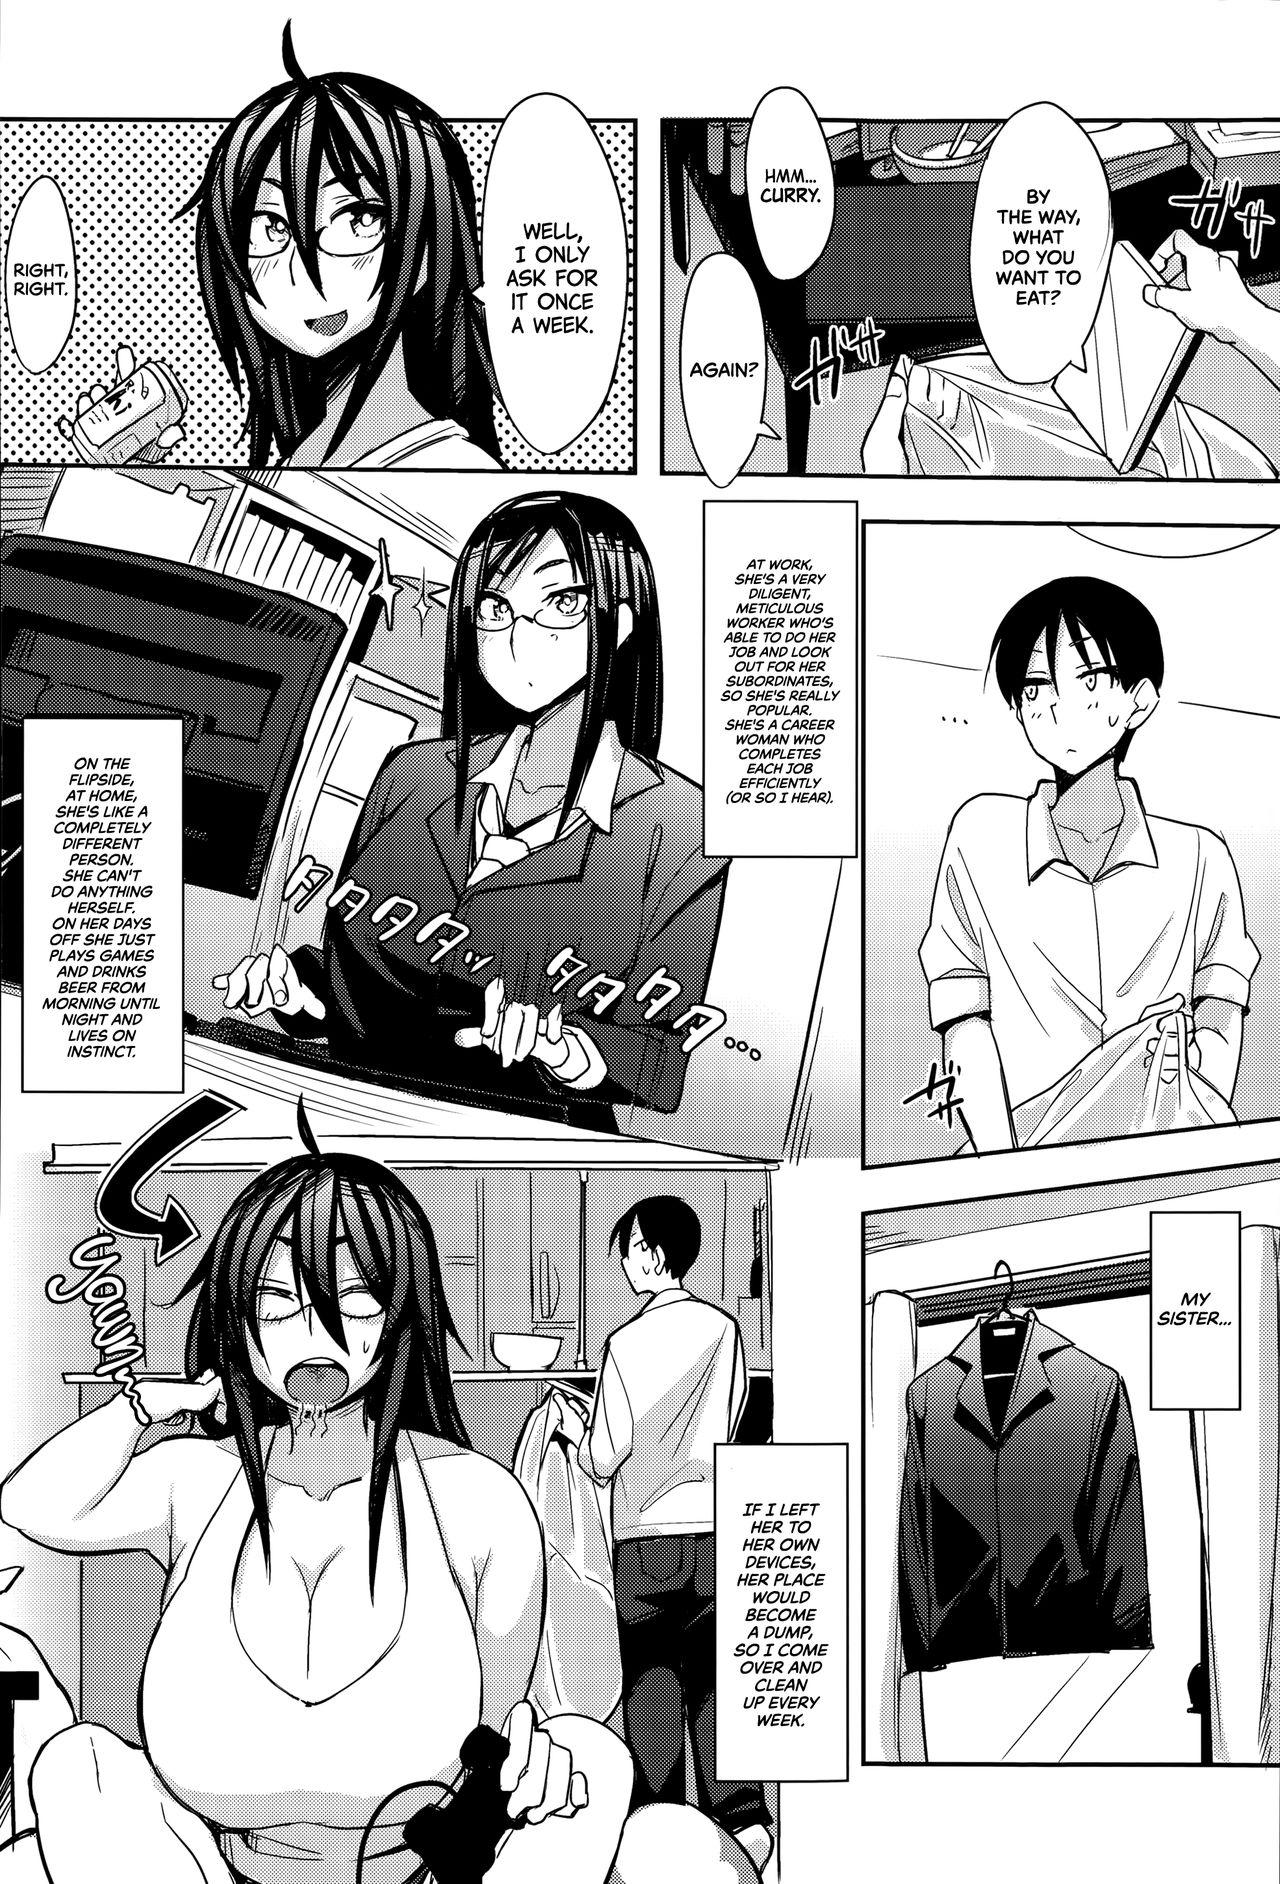 Blackdick Onee-chan no Uragao | My Sister's Other Side Casa - Page 2